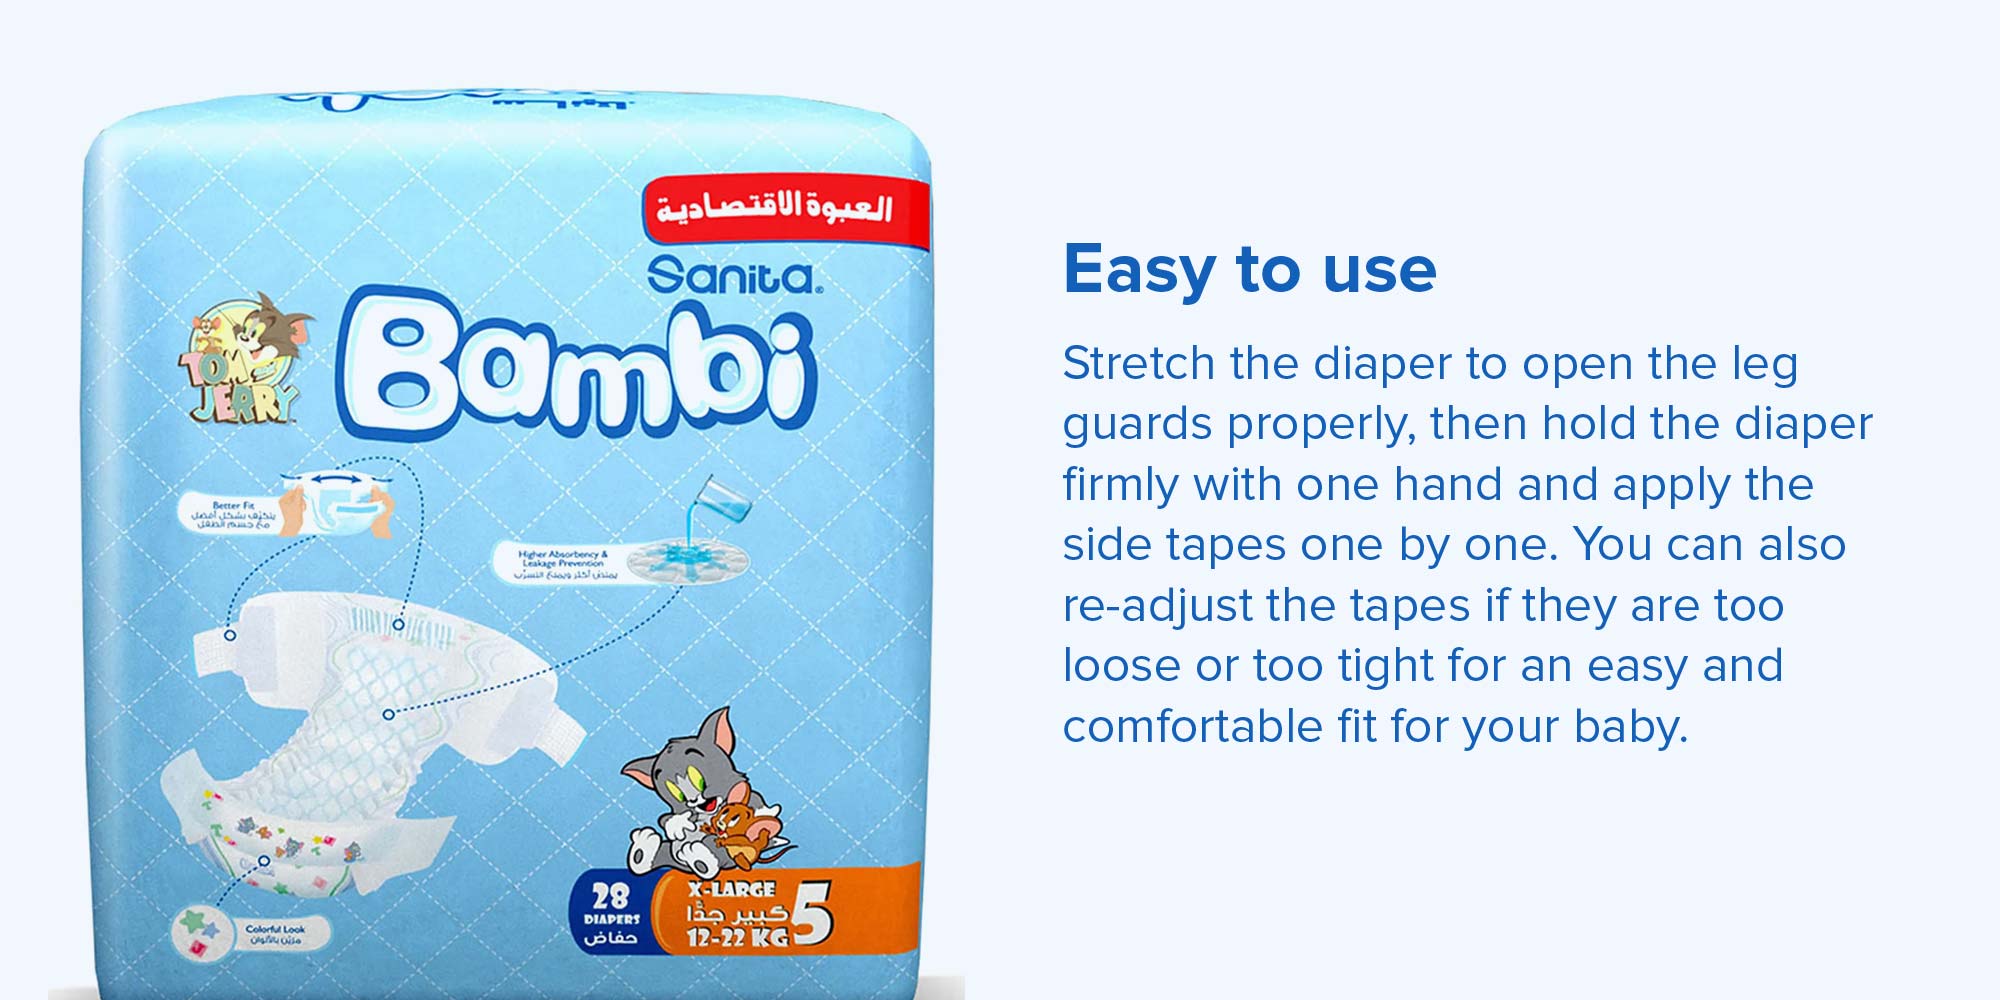 Baby Diapers, Size 5, 12 - 22 Kg, 28 Count - X Large, Value Pack, Now Thinner And More Absorbent